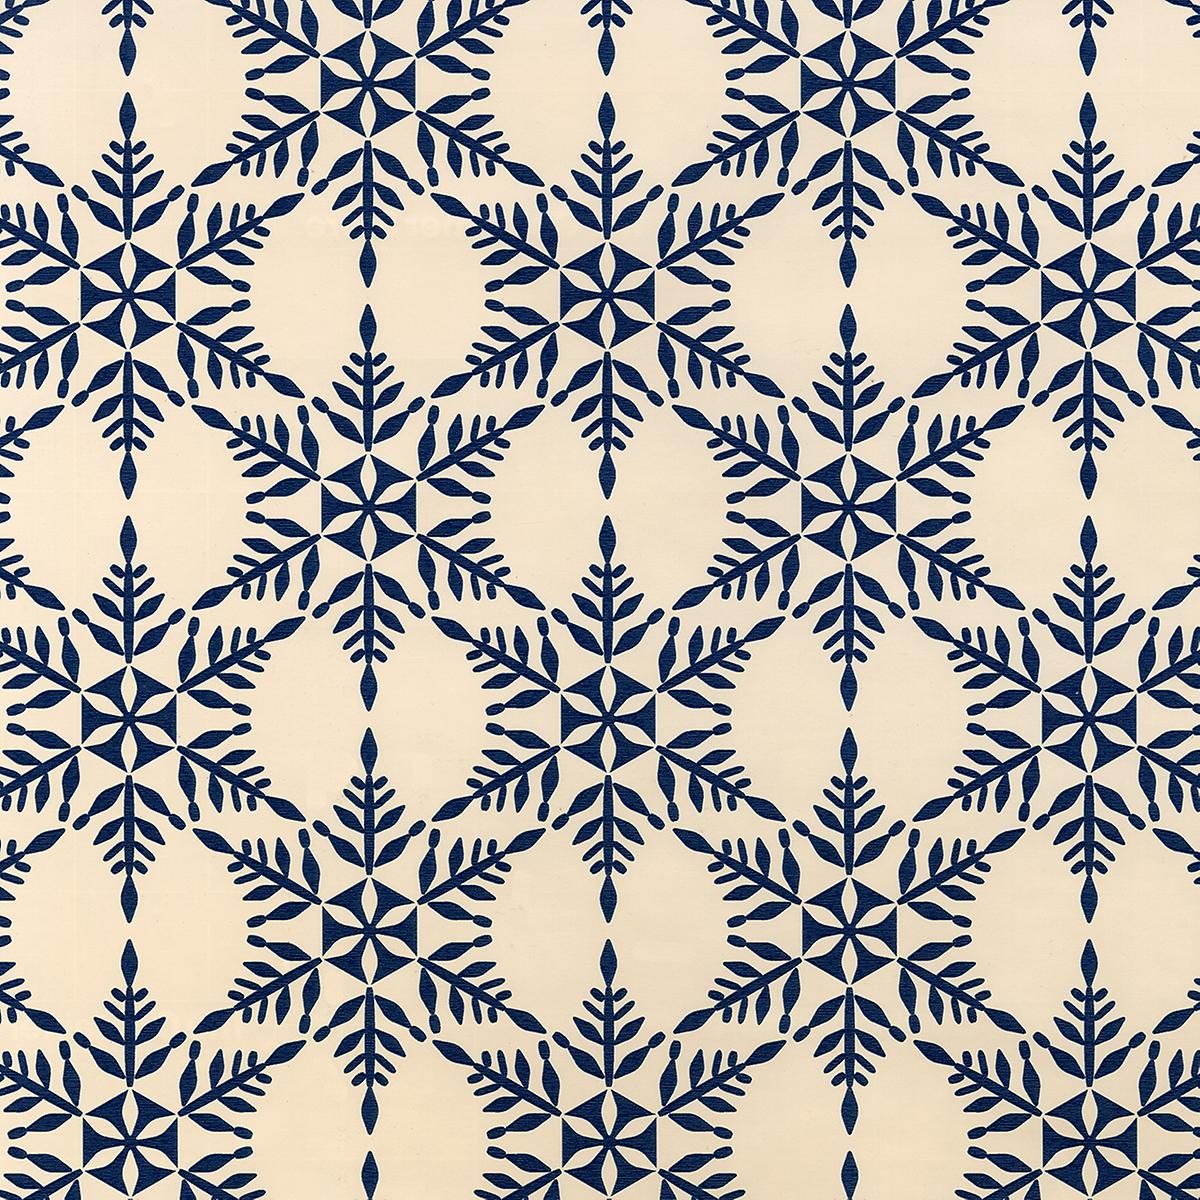 Dark Blue Snowflakes Wrapping Paper | The Container Store